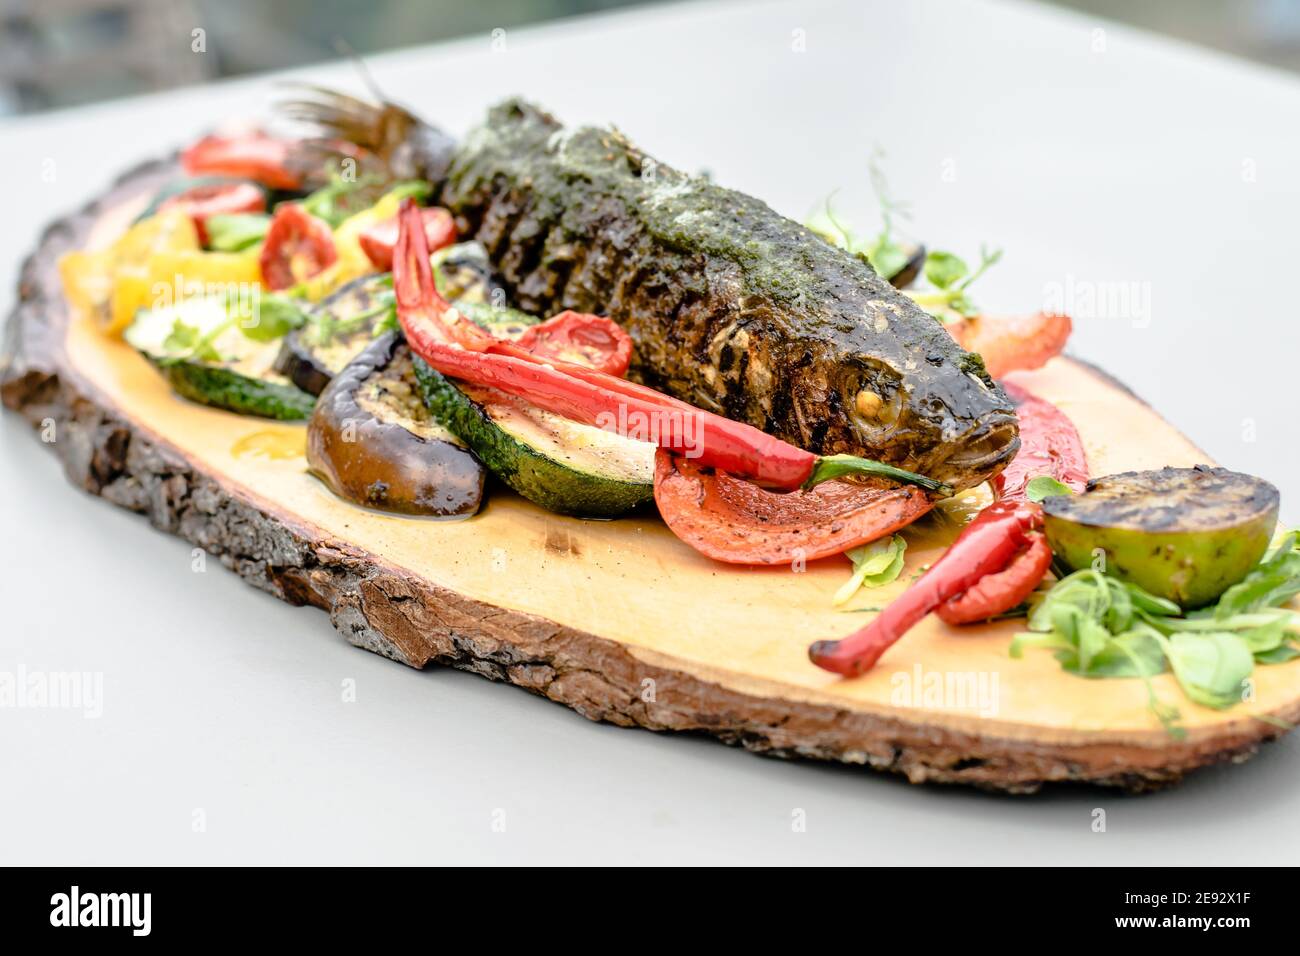 Fried fish on a wood plate at a restaurant Stock Photo